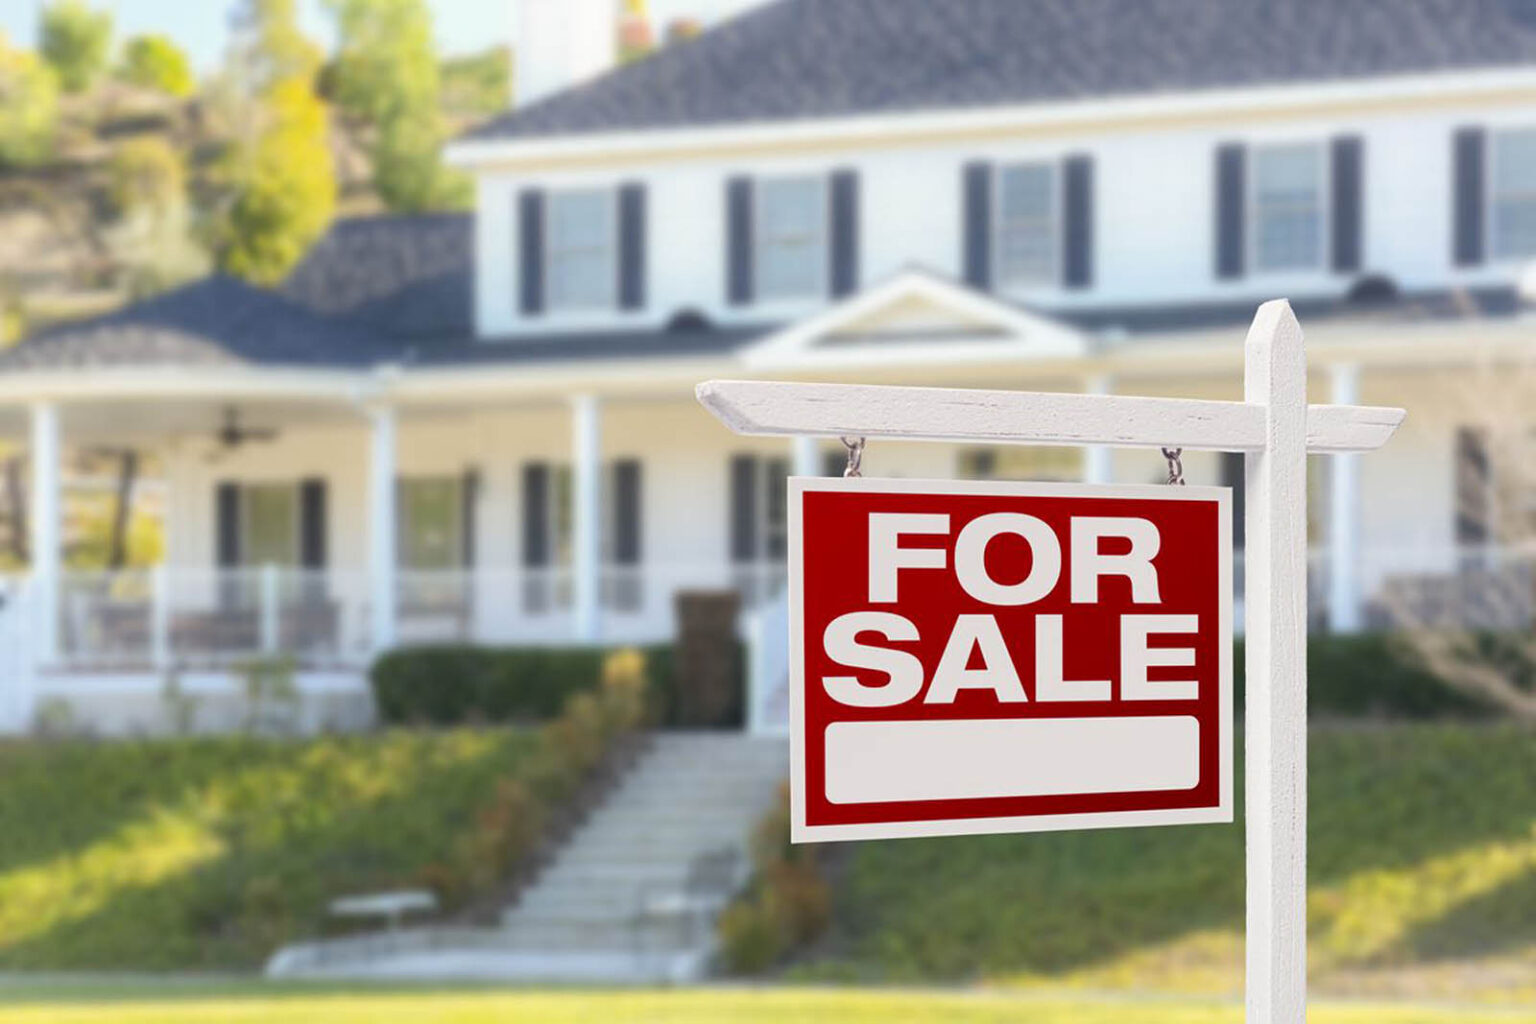 Are you thinking about selling your house? Dive into the details of some common reasons why people sell their home before you decide!